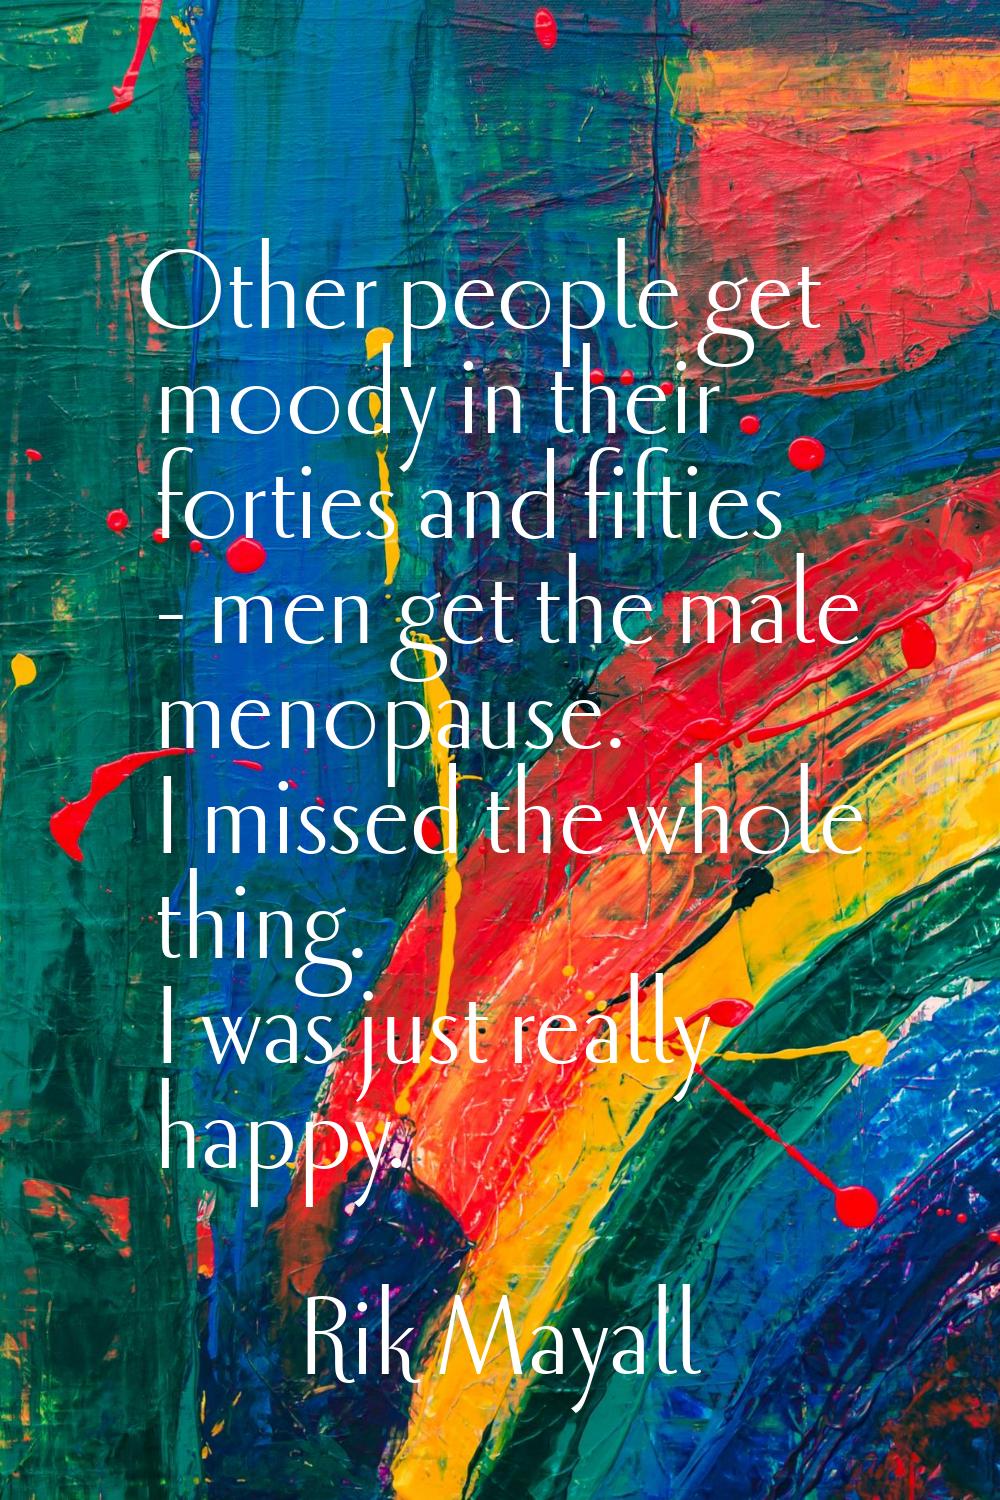 Other people get moody in their forties and fifties - men get the male menopause. I missed the whol